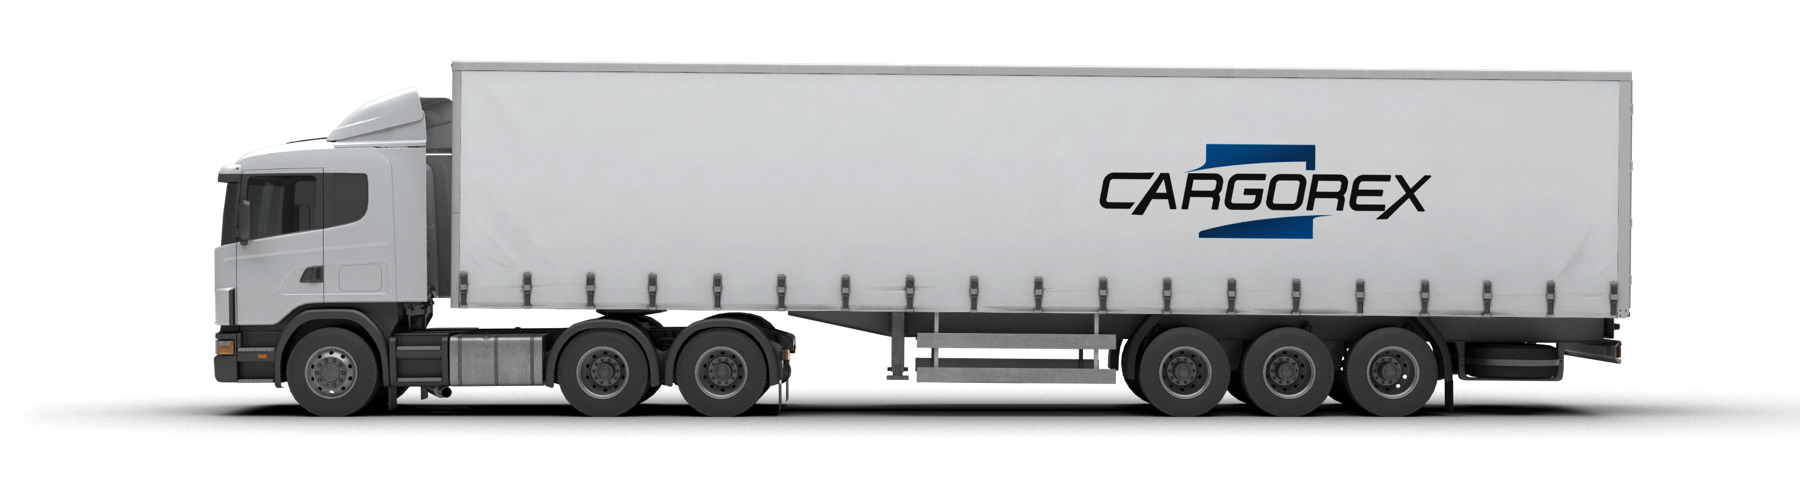 Cargorexpsd online - Lincolnshire Freight Services